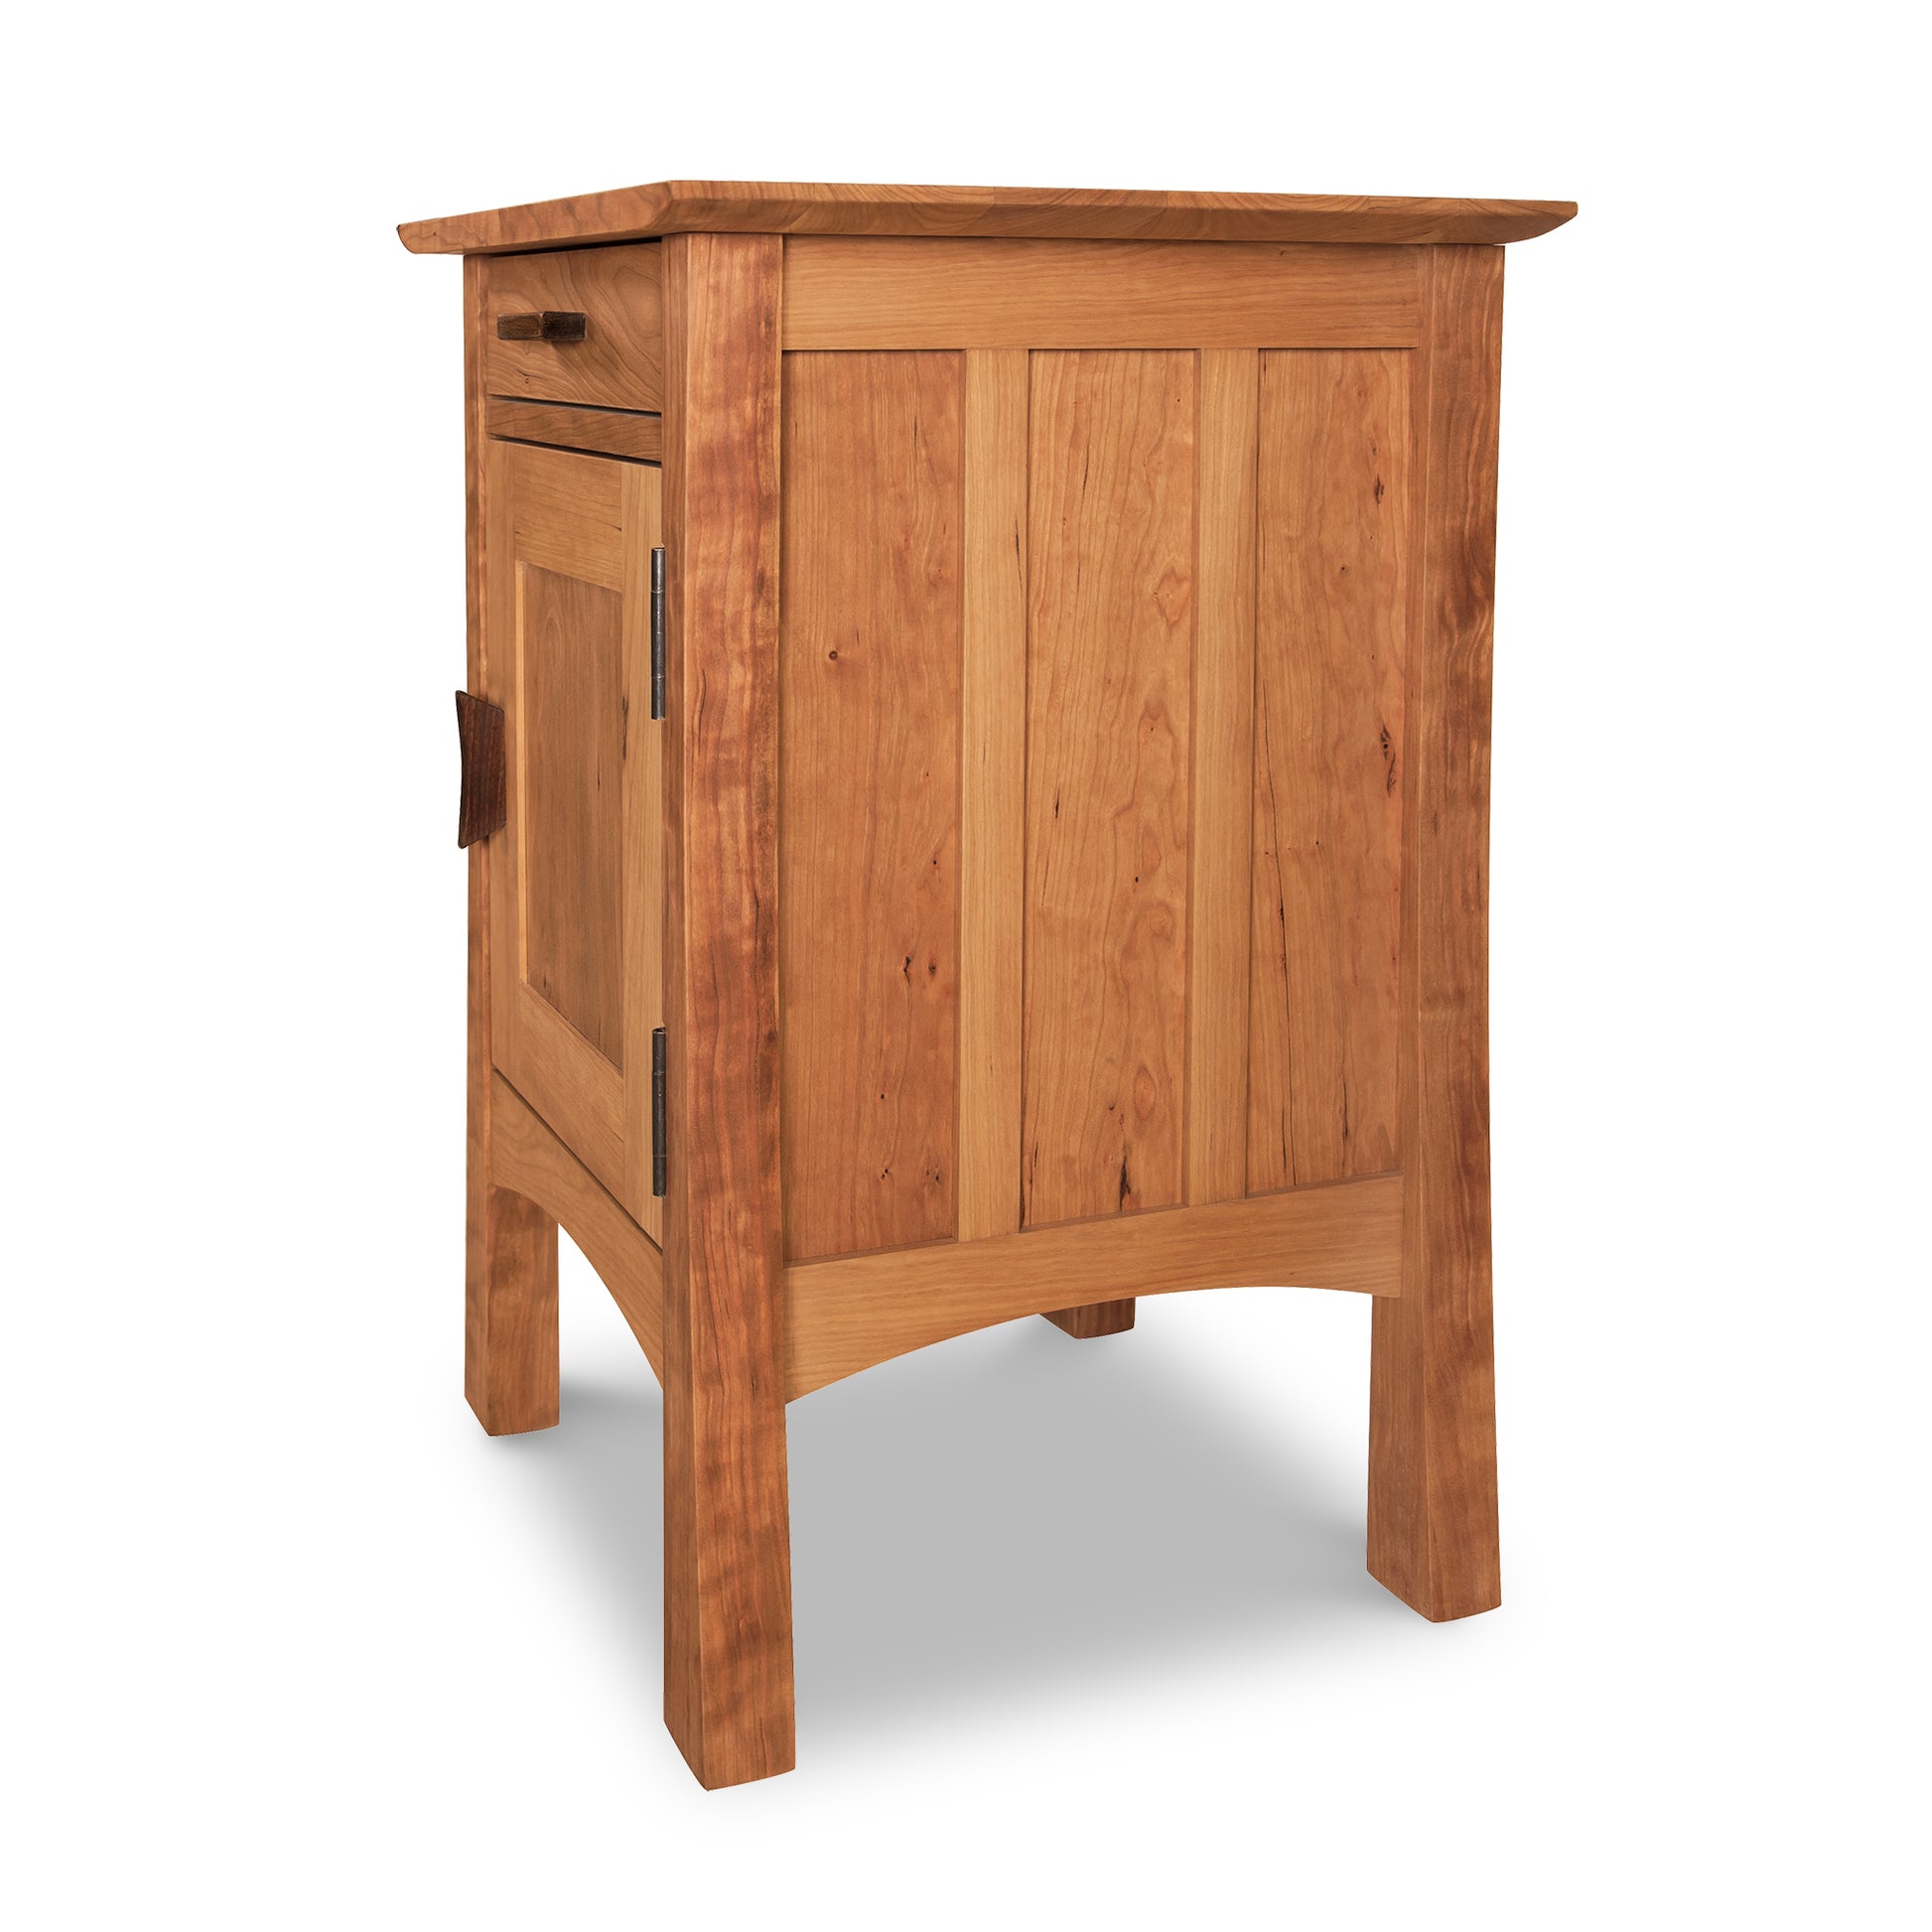 A Vermont Furniture Designs Contemporary Craftsman 1-Drawer Nightstand with Door, isolated on a white background.